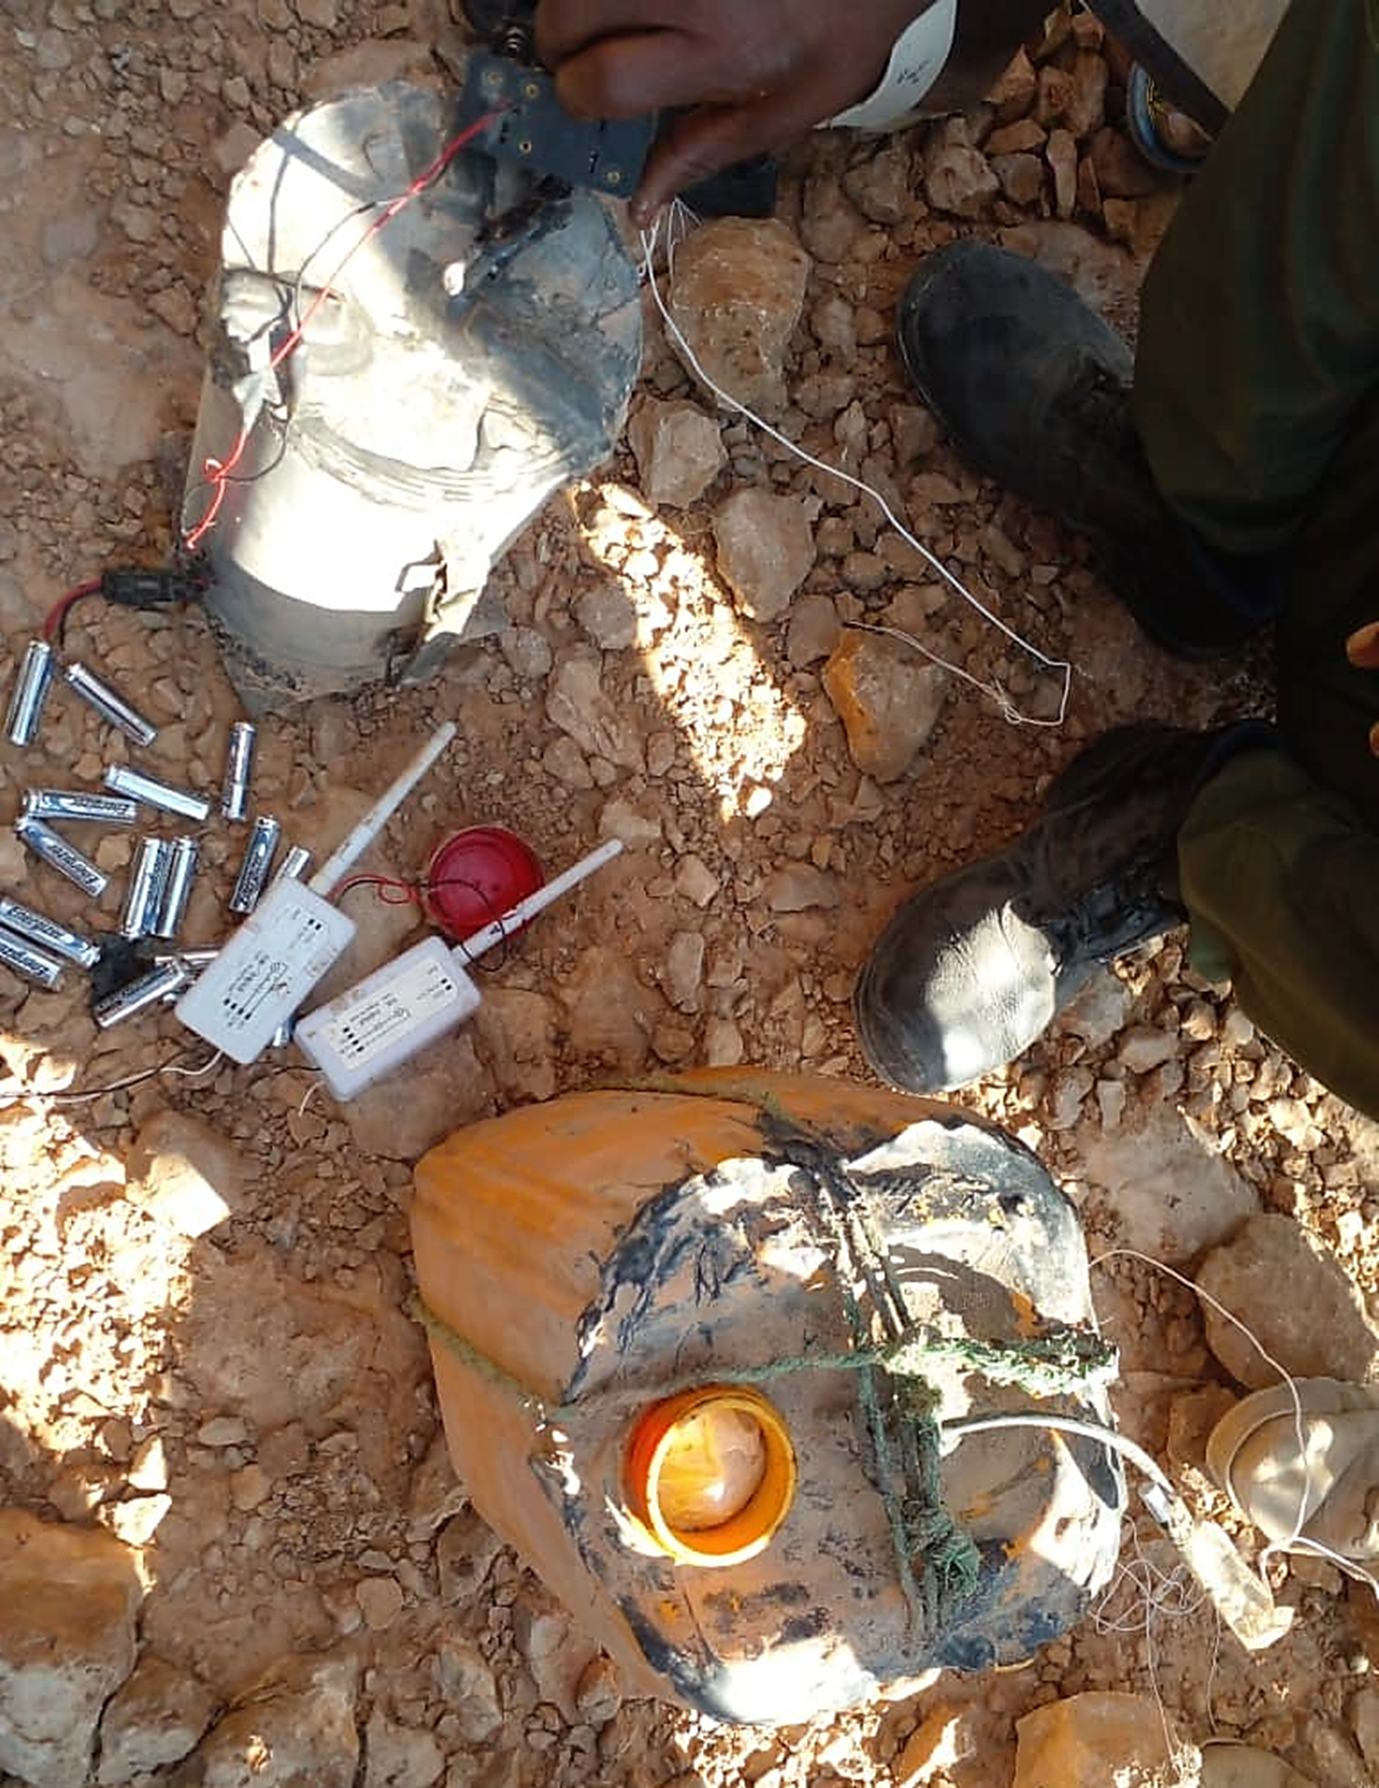 Mobius report 57/2023 – Islamic State in Somalia IEDs in Puntland